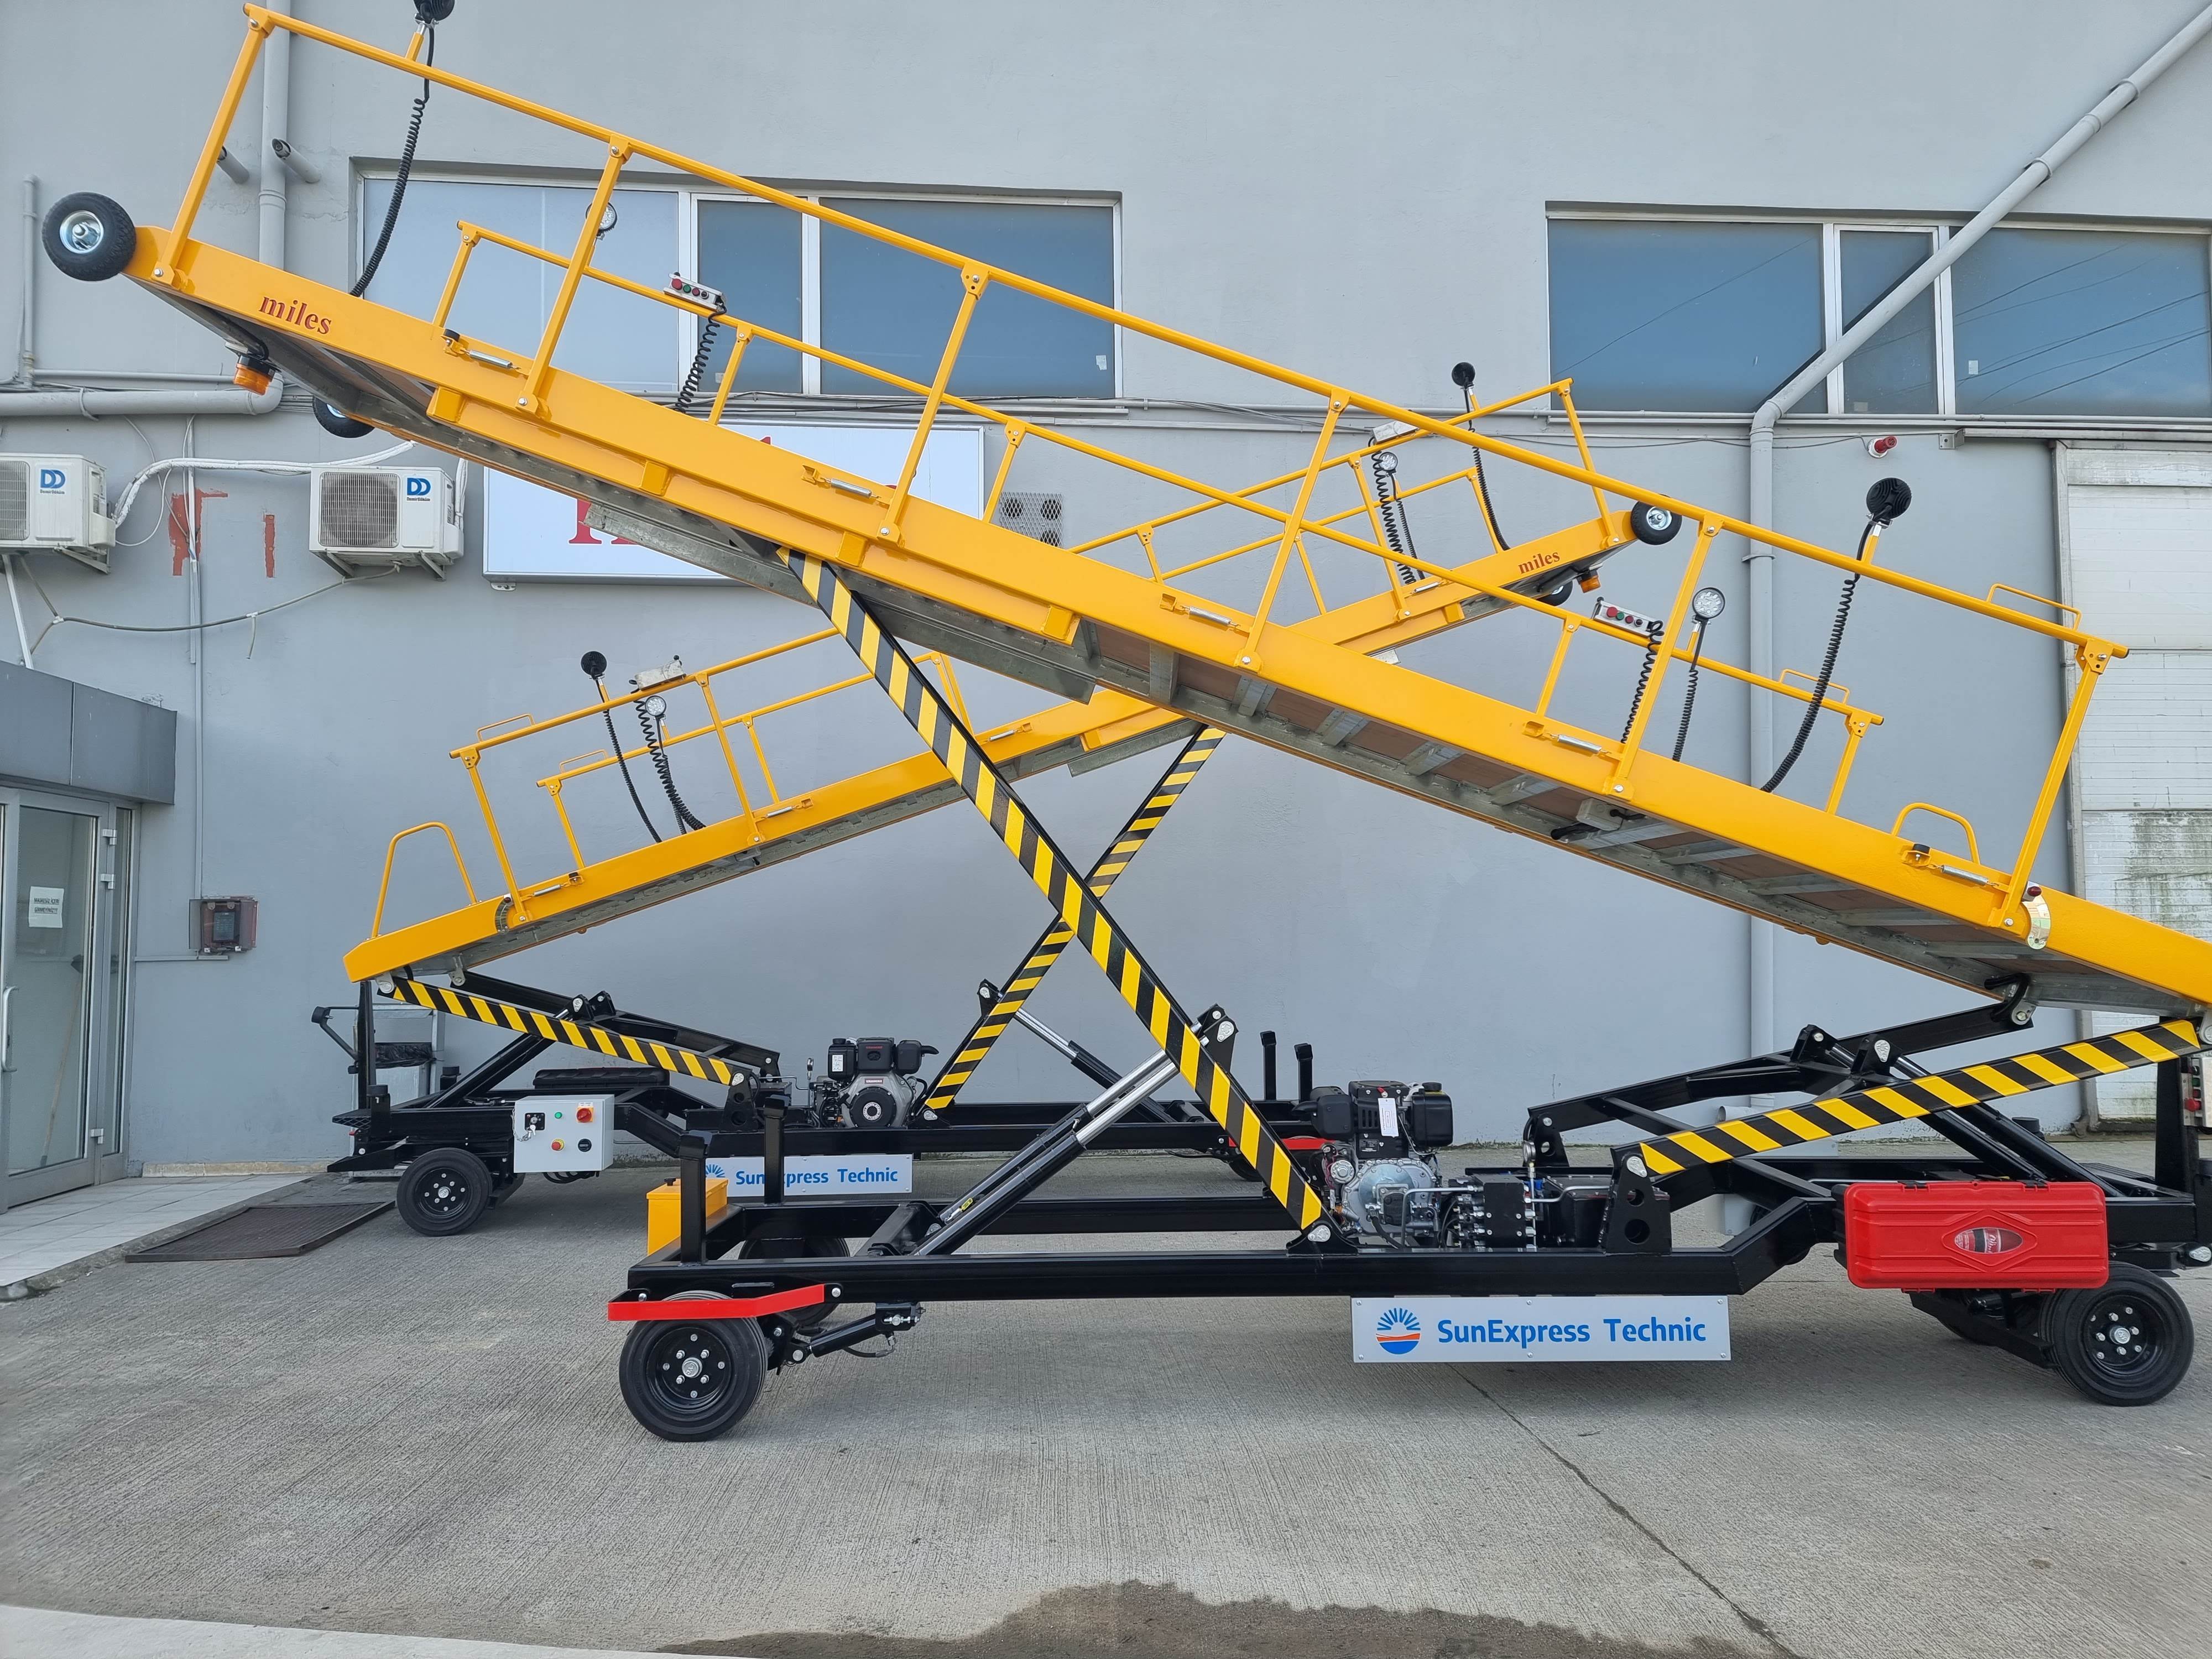 Production and delivery of Mobile Maintenance Platforms to SunExpress.